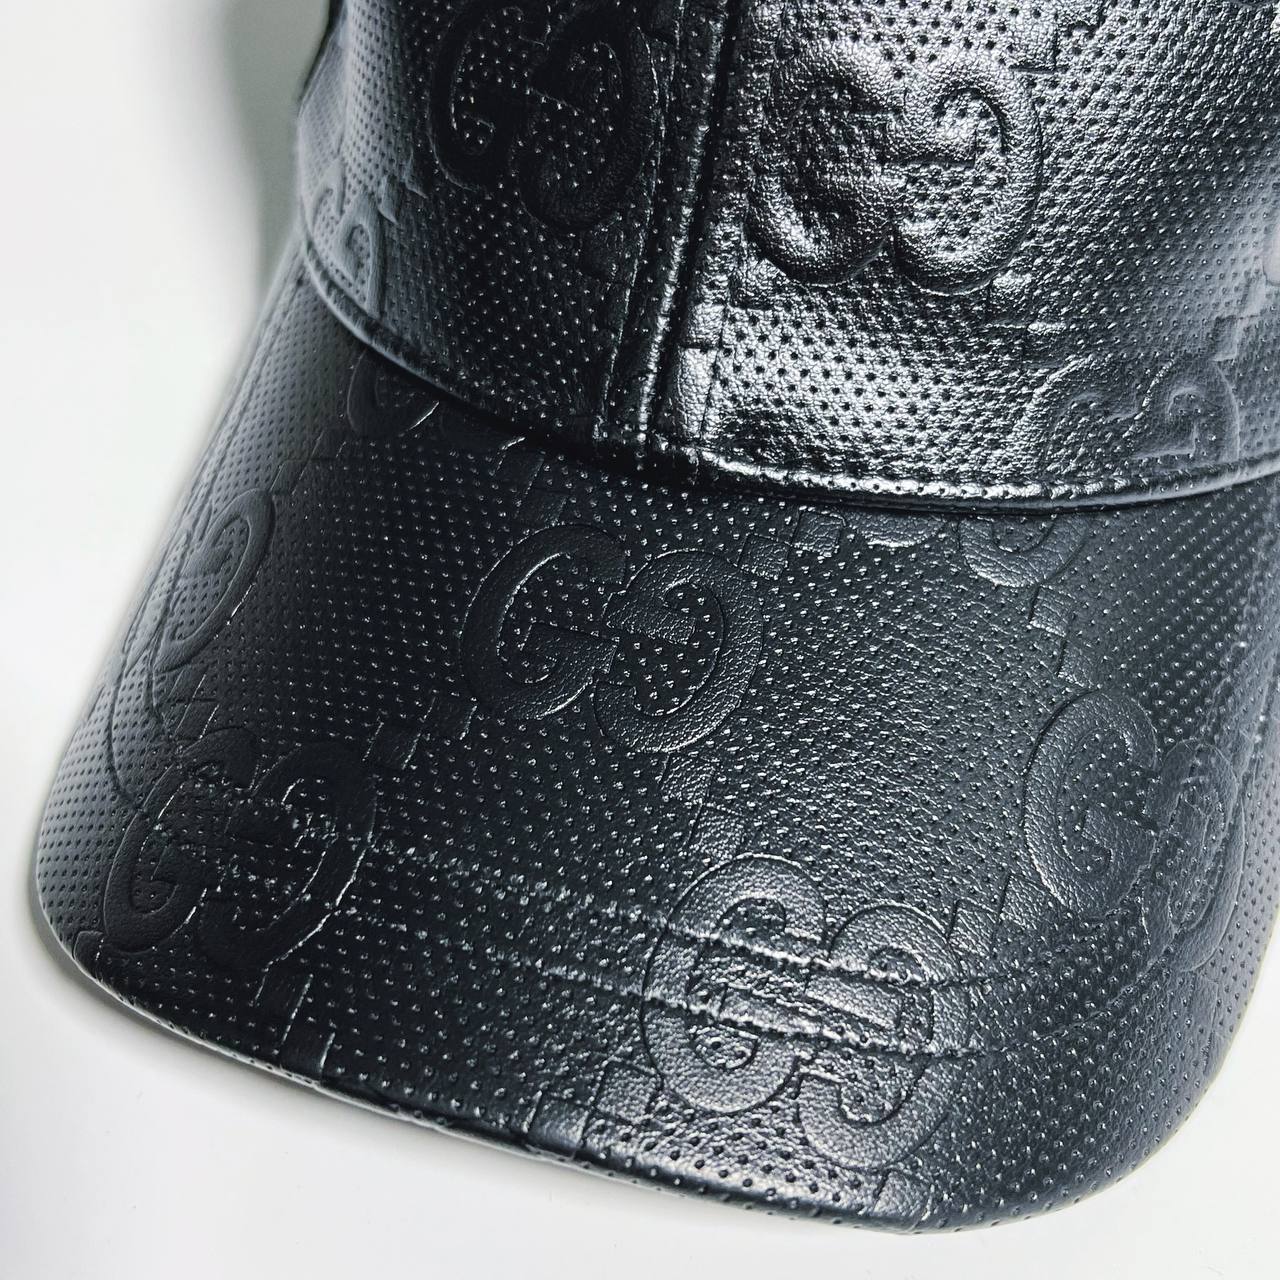 GG Embossed Baseball Hat in Black - Gucci